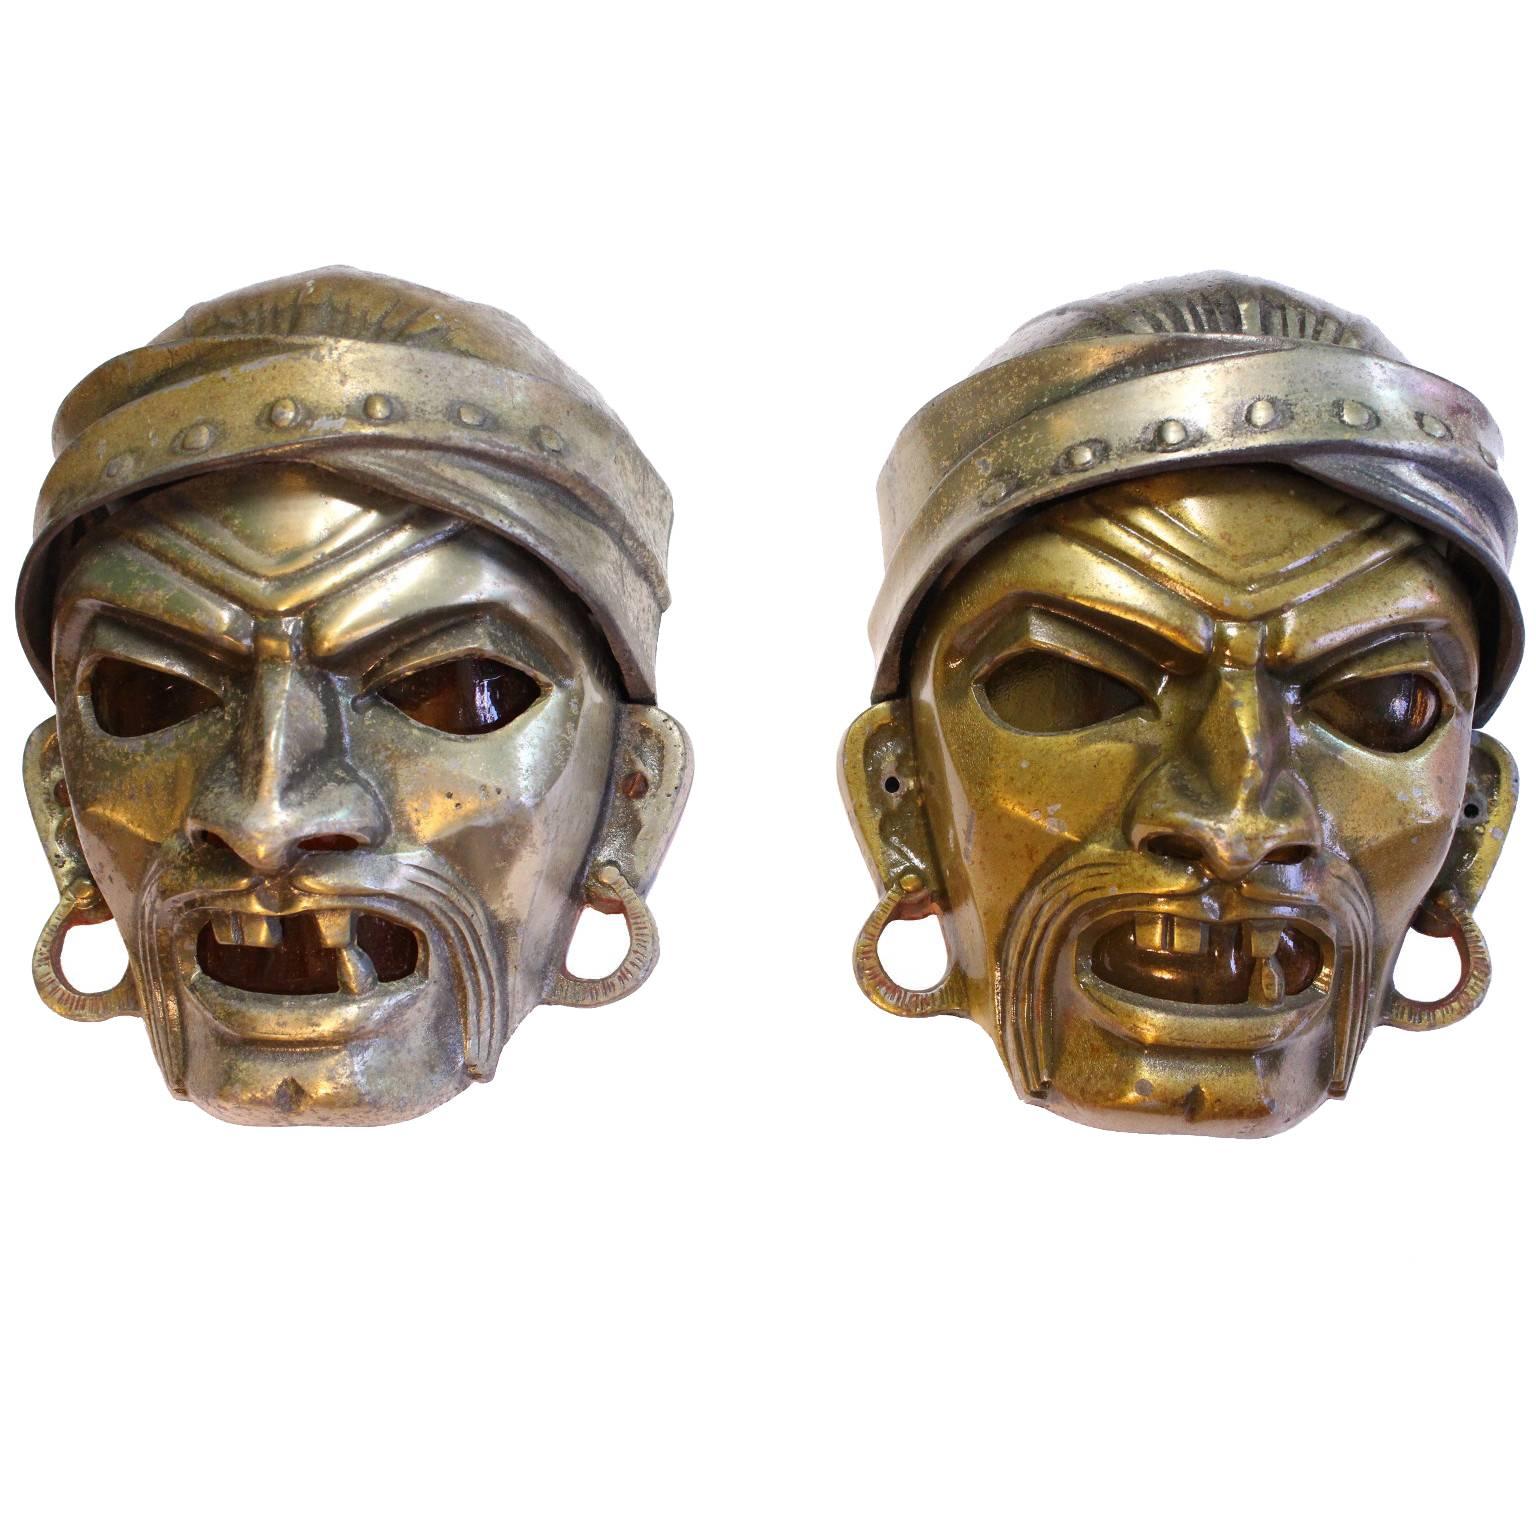 A pair of vintage flush mount wall sconces, produced circa 1930s within the Art Deco period, with cast metal shades formed as grotesque sculptural masks, each face detailed with deep embedded lines, accentuating a furrowed brow and fearsome, mostly